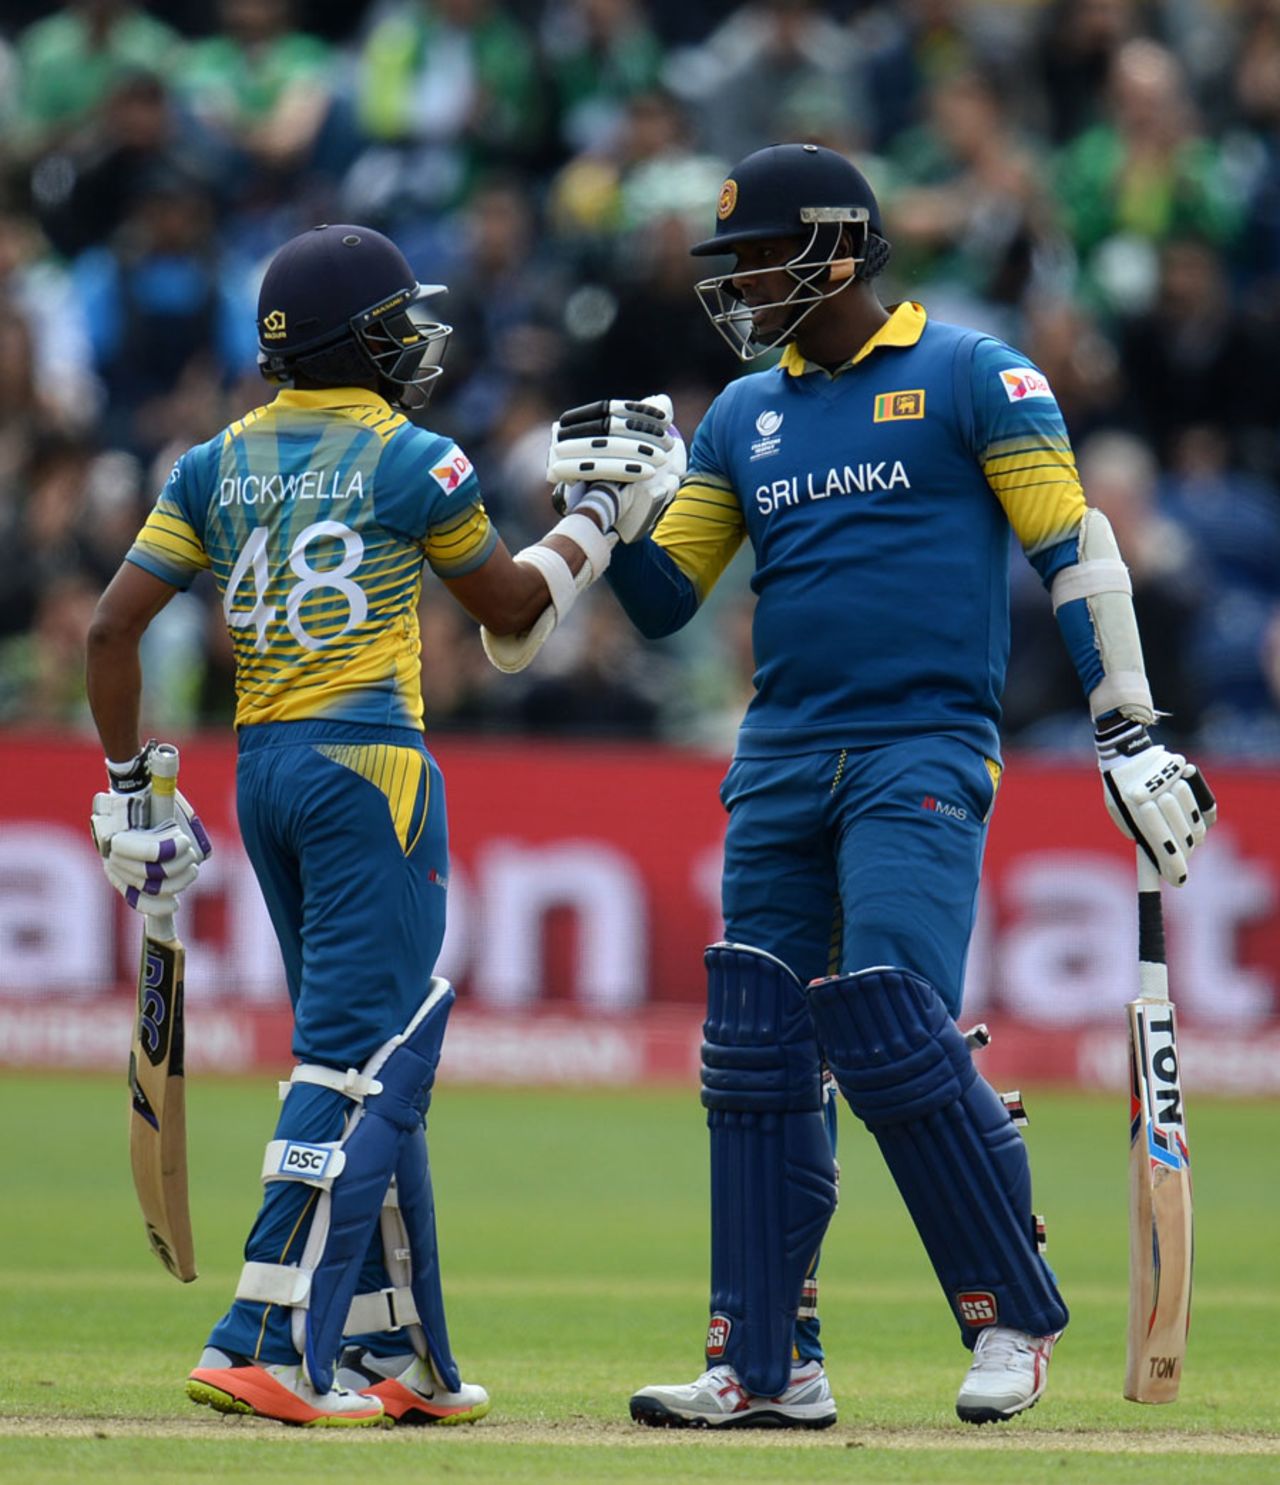 Angelo Mathews speaks to Niroshan Dickwella after the opener brings up his fifty, Champions Trophy 2017, Group B, Cardiff, London, June 12, 2017